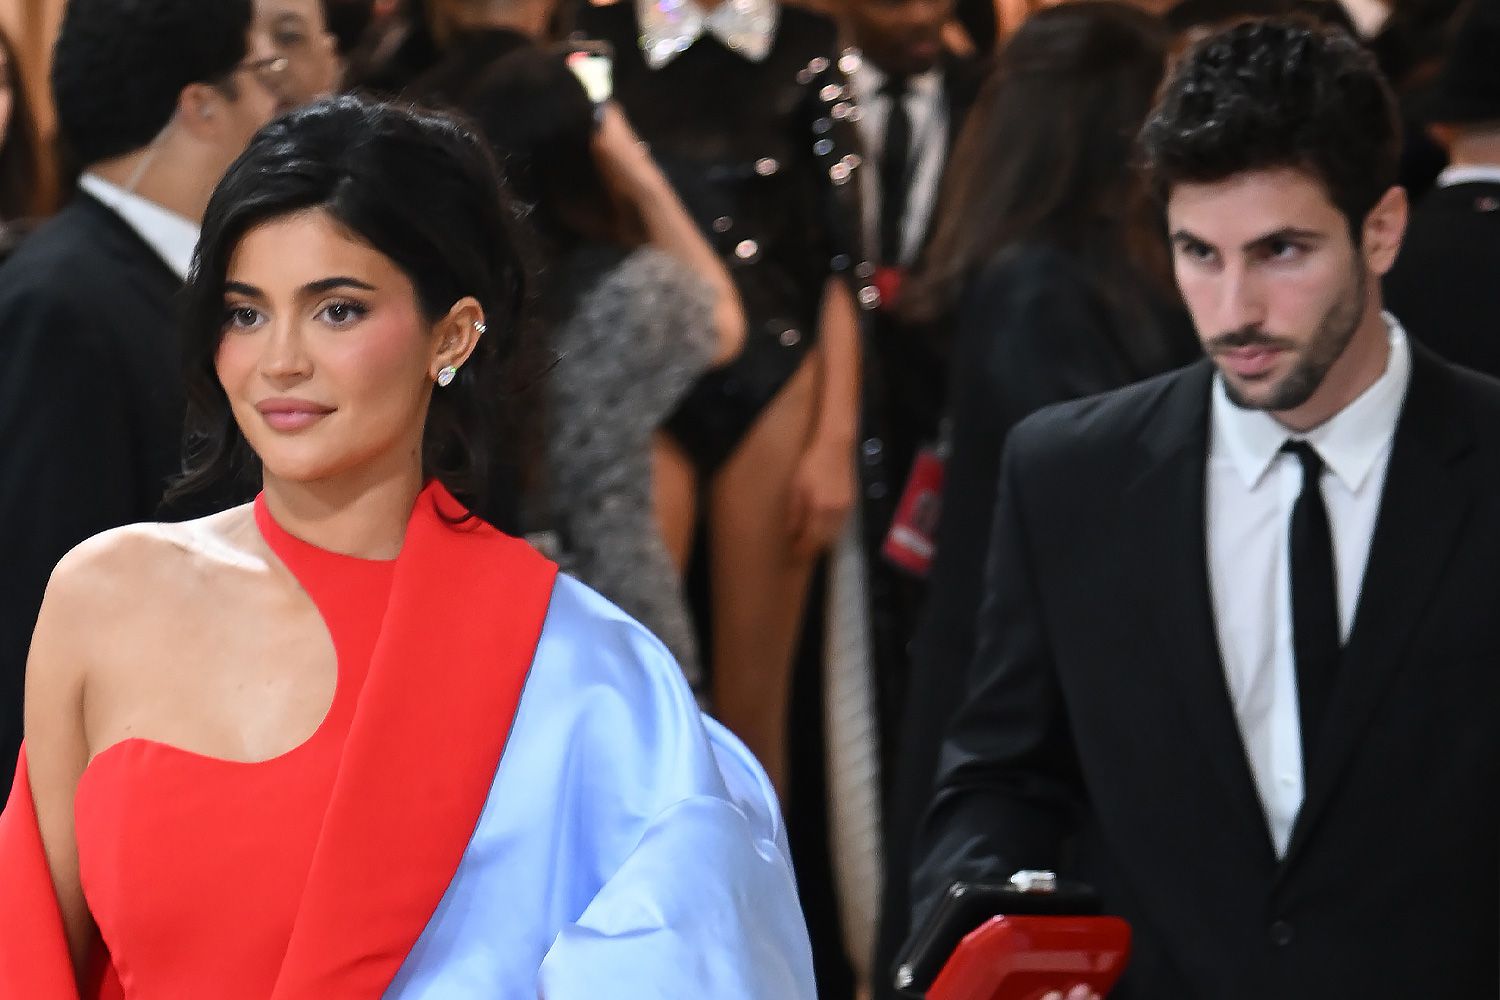 Kylie Jenner Got An Italian Model FIRED From Met Gala For Overshadowing